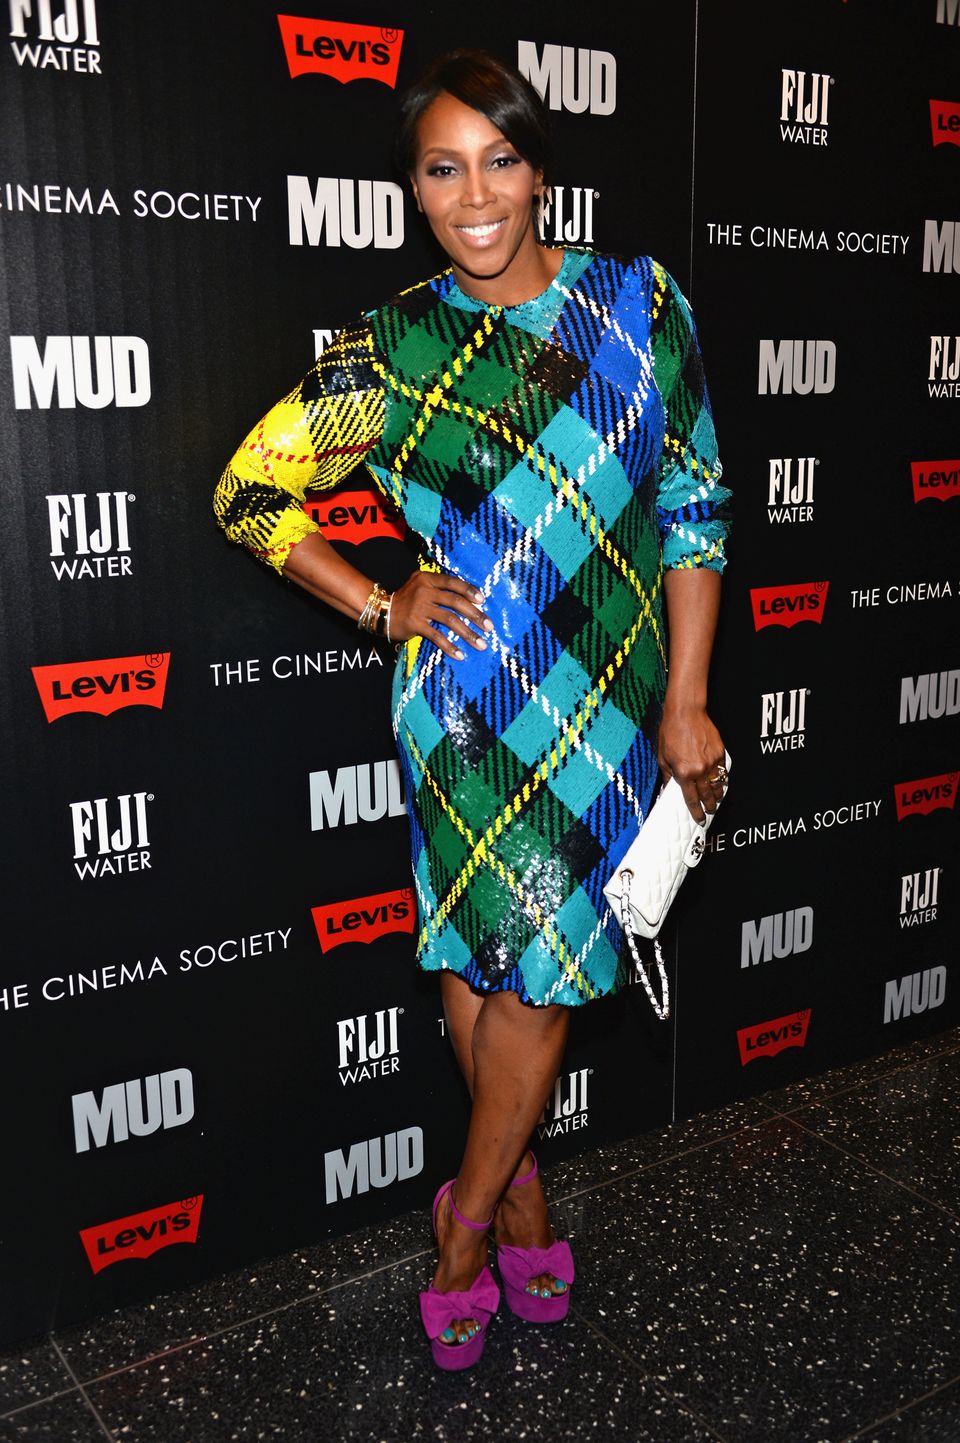 The Cinema Society With FIJI Water & Levi's Present A Screening Of "Mud" - Arrivals